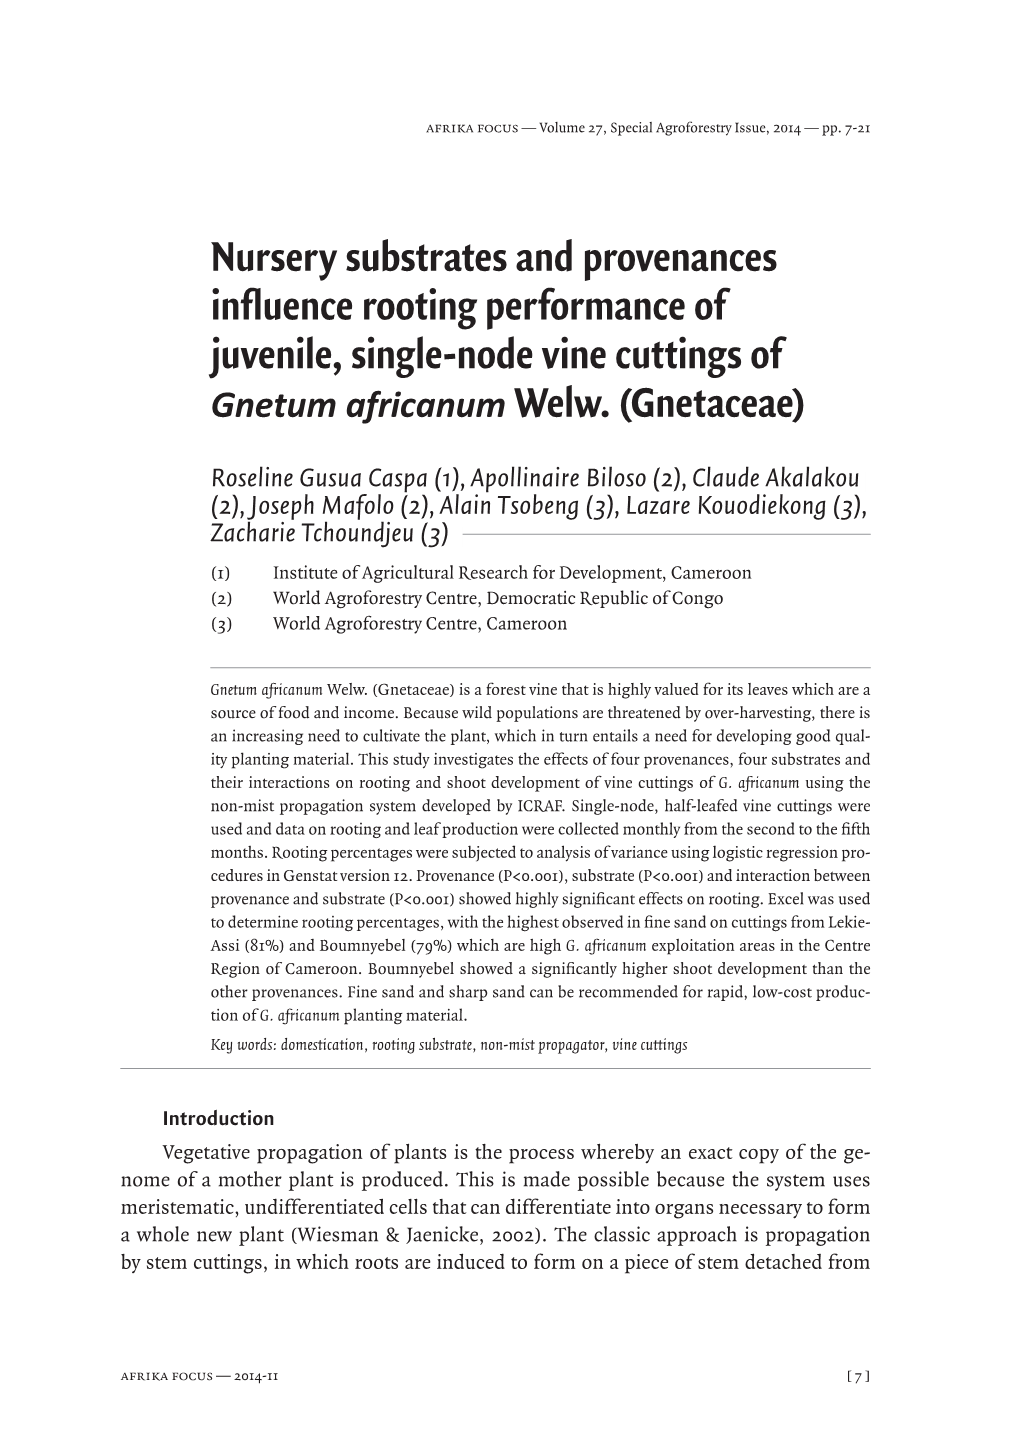 Nursery Substrates and Provenances Influence Rooting Performance of Juvenile, Single-Node Vine Cuttings of Gnetum Africanum Welw